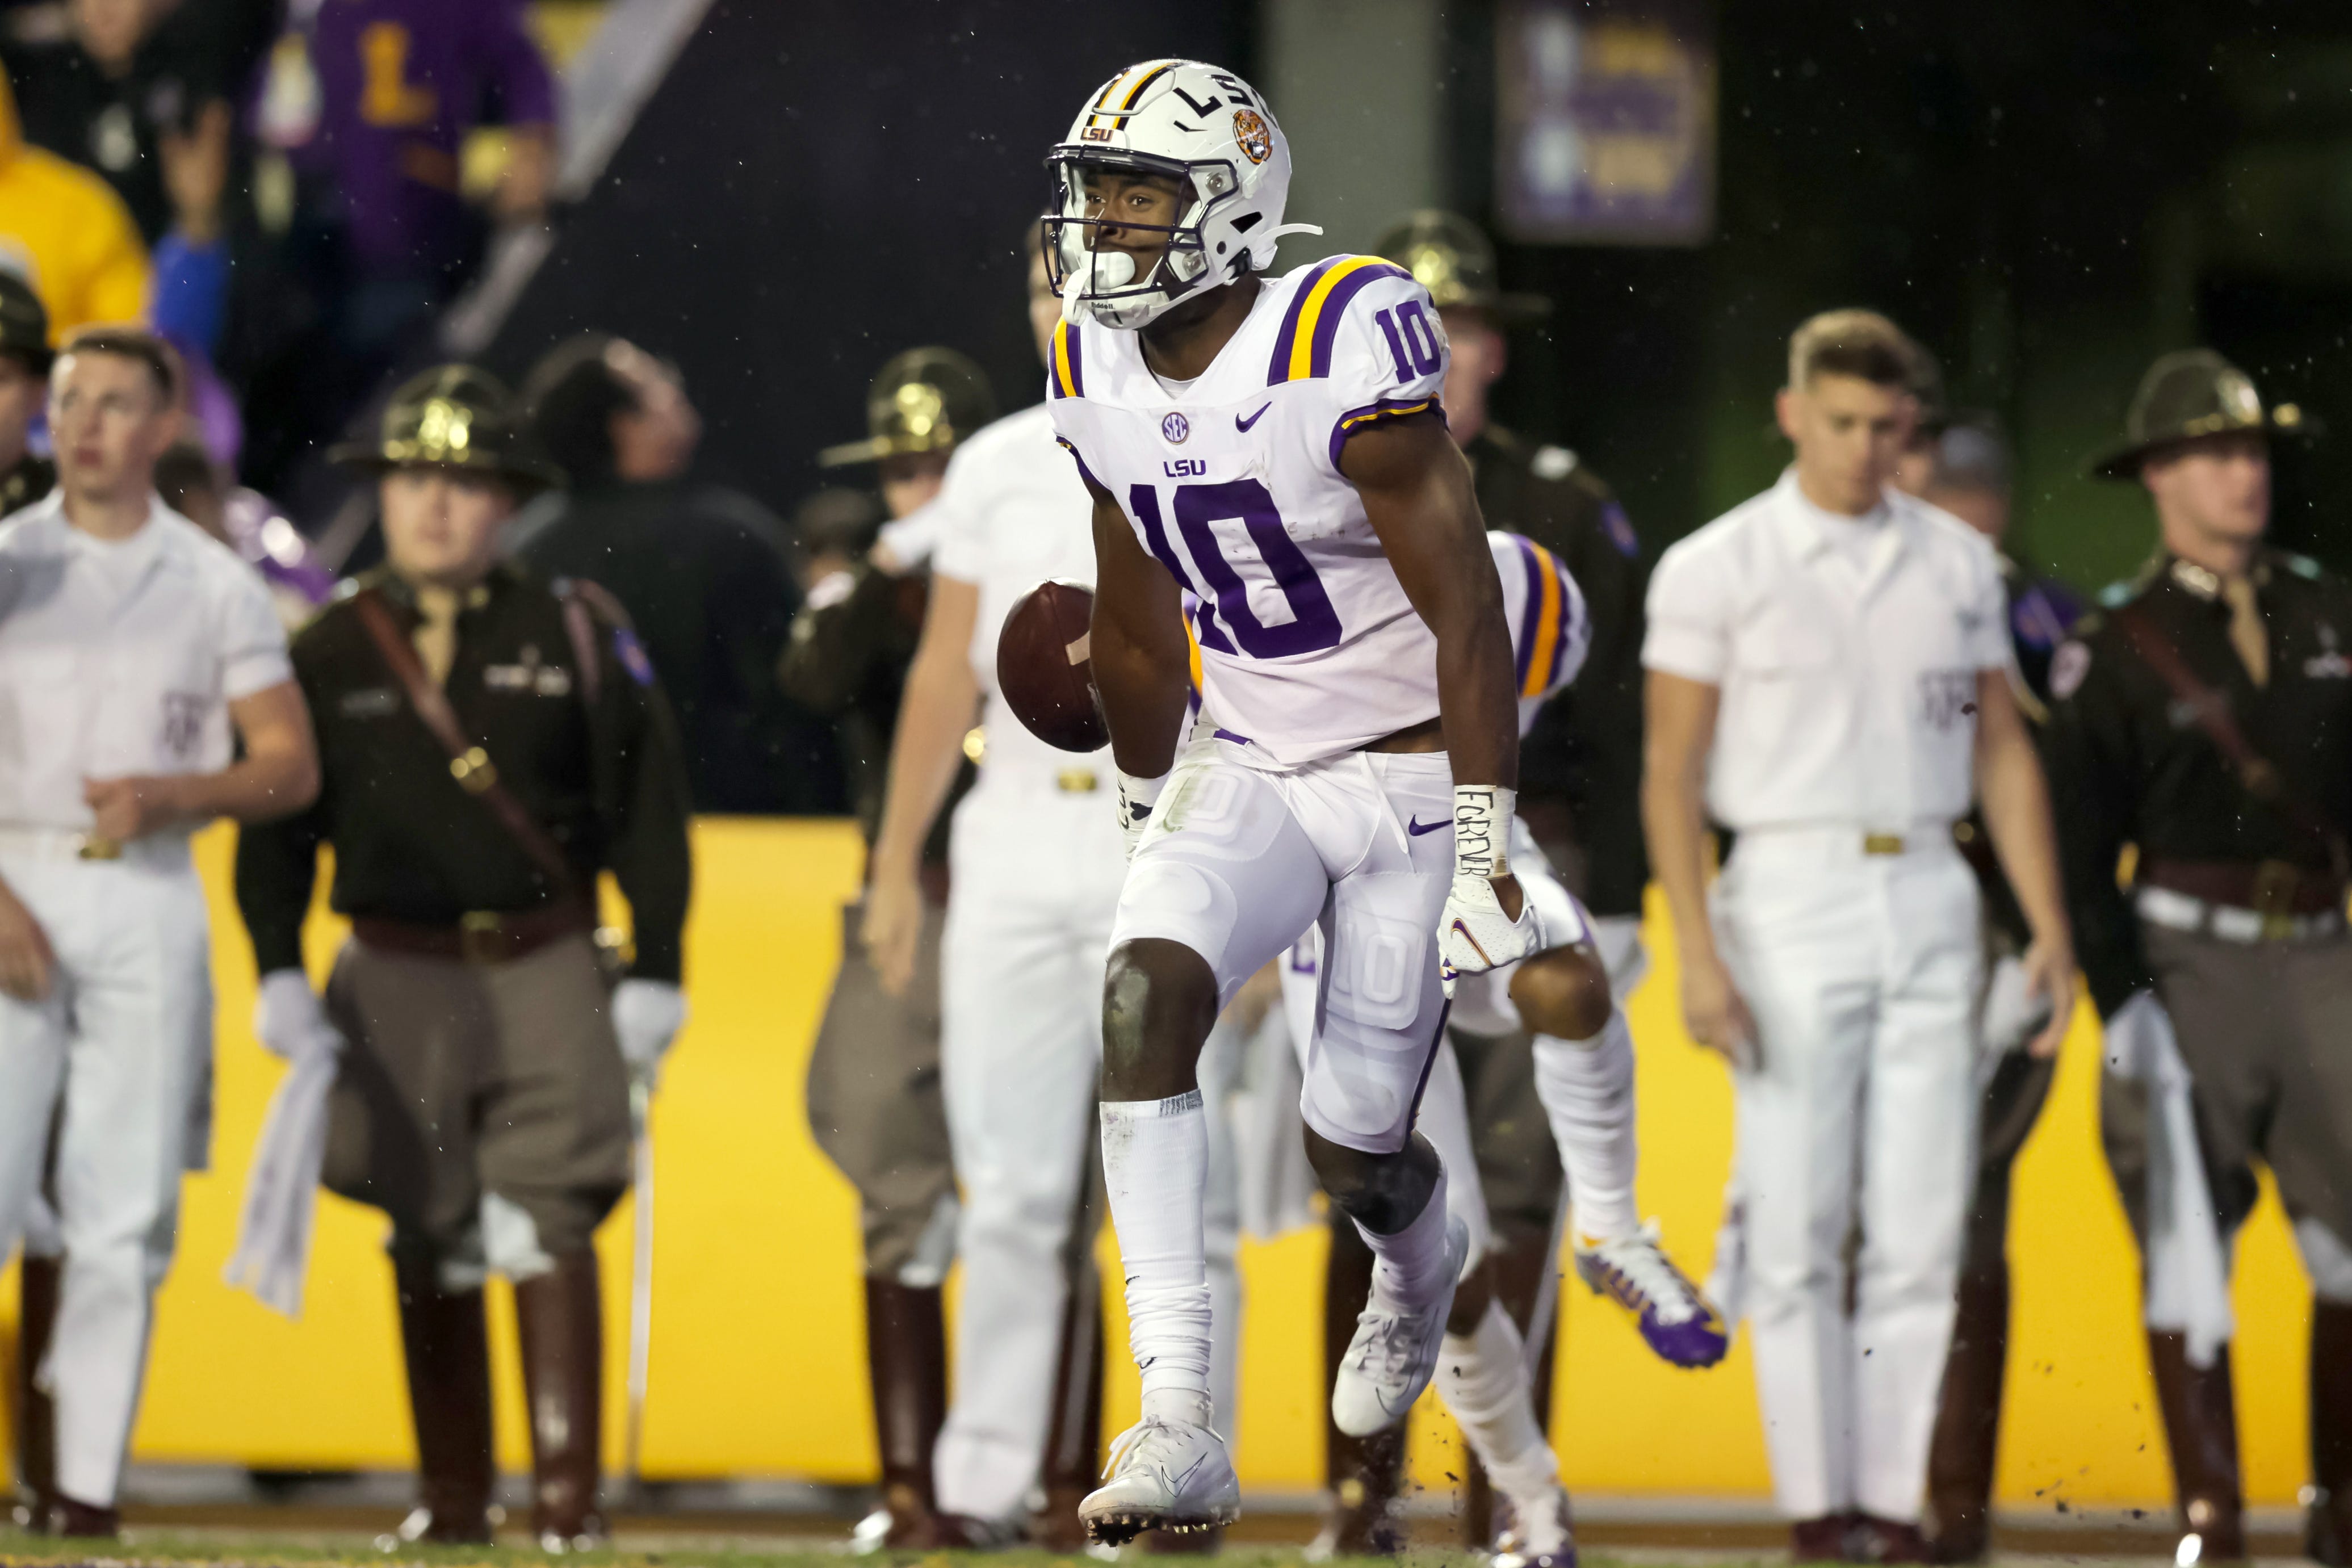 Kstate Football Schedule 2022 How To Watch Lsu Vs. K-State Football On Tv, Live Stream In Texas Bowl